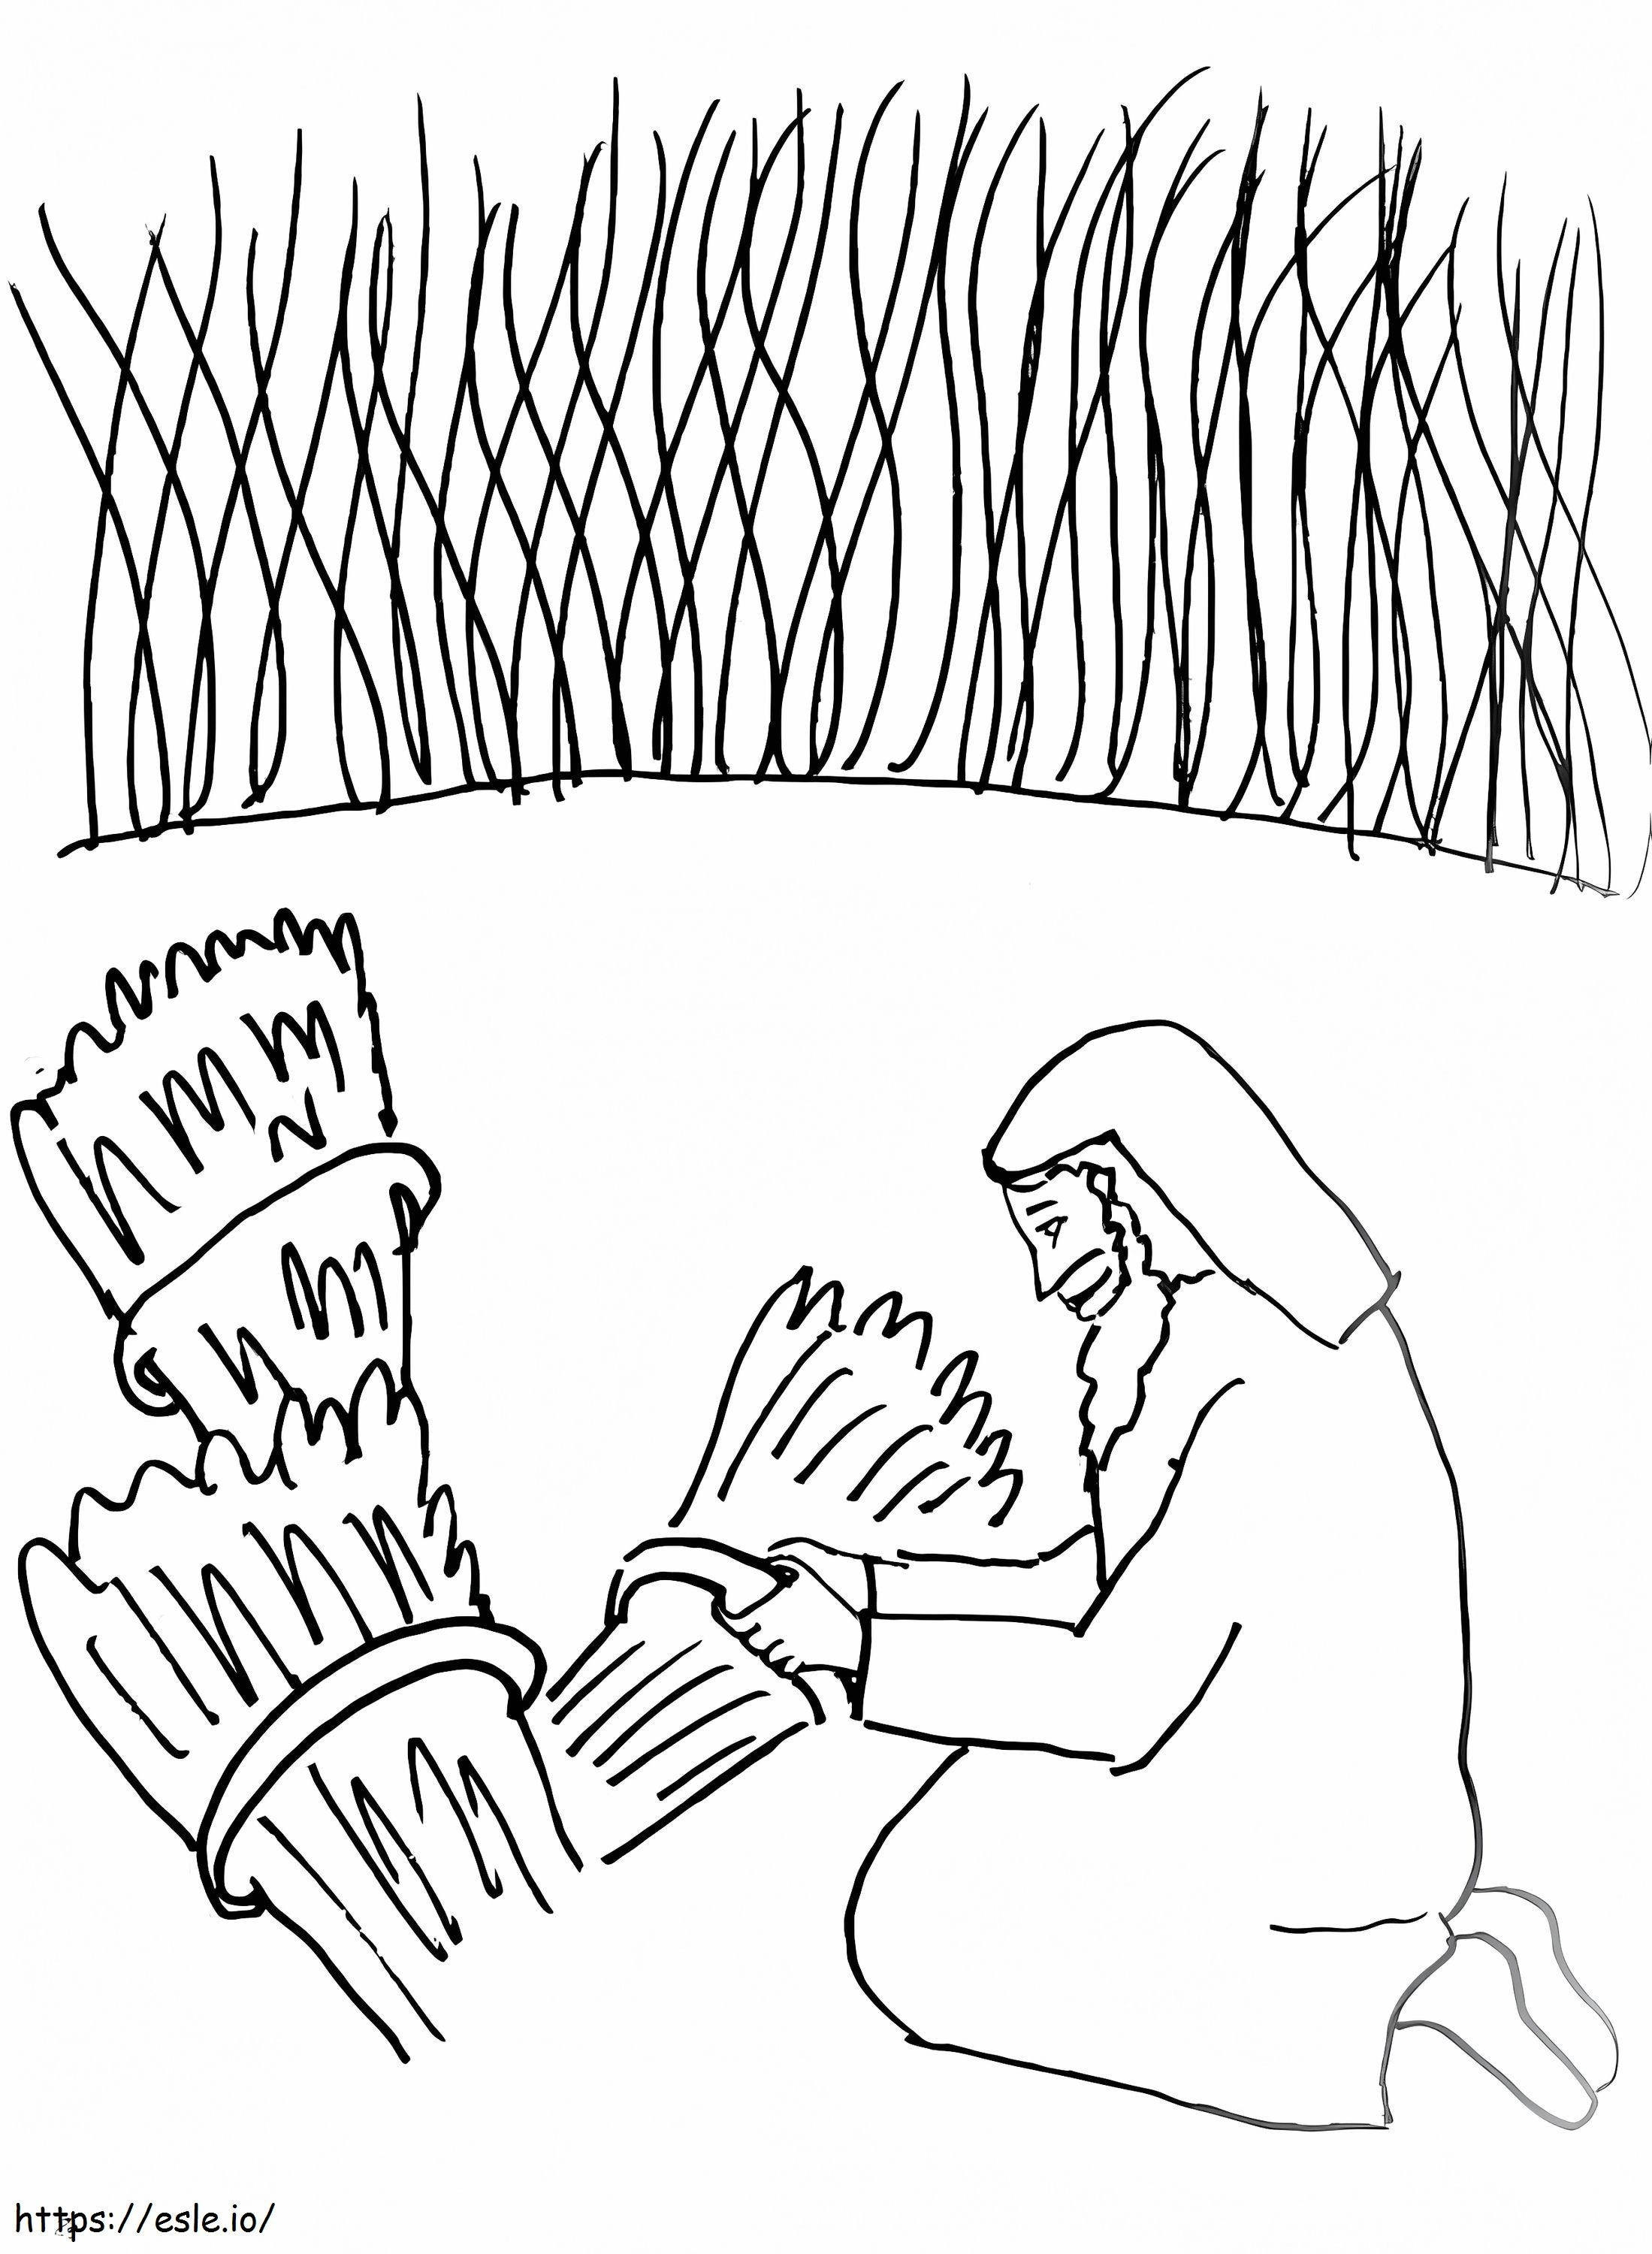 Farmer And Wheat coloring page